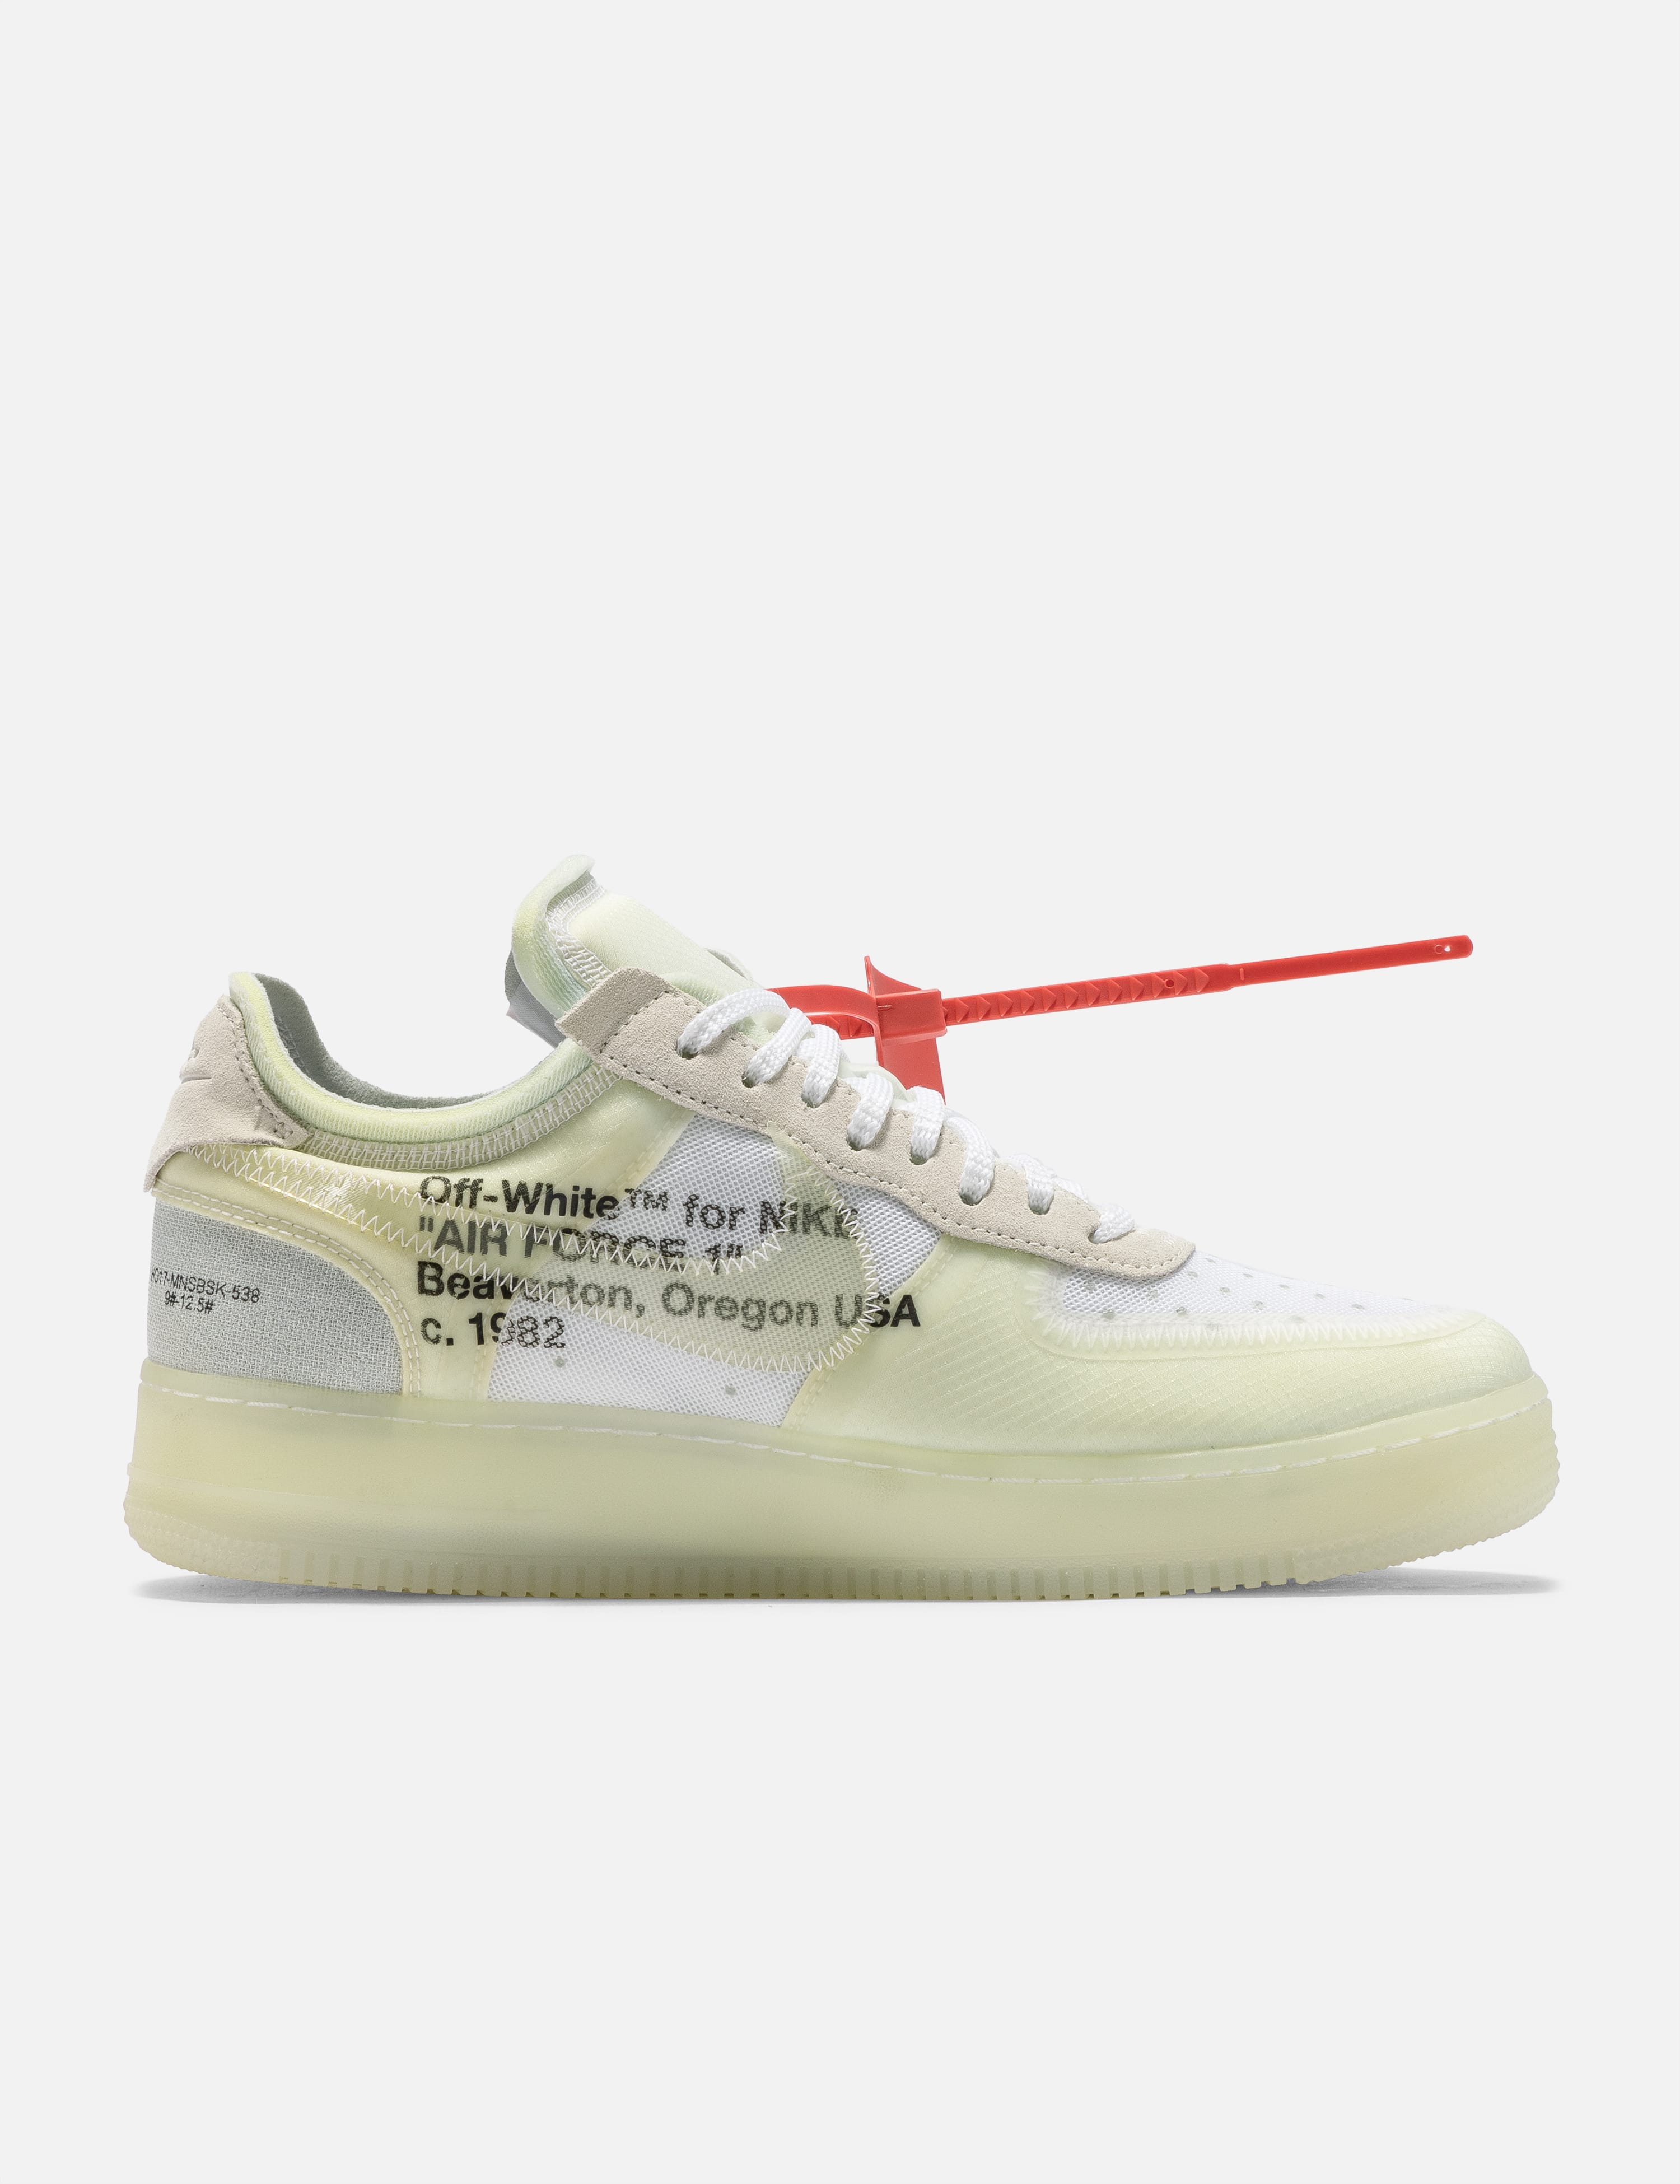 Nike - THE 10 : NIKE AIR FORCE 1 LOW | HBX - Globally Curated